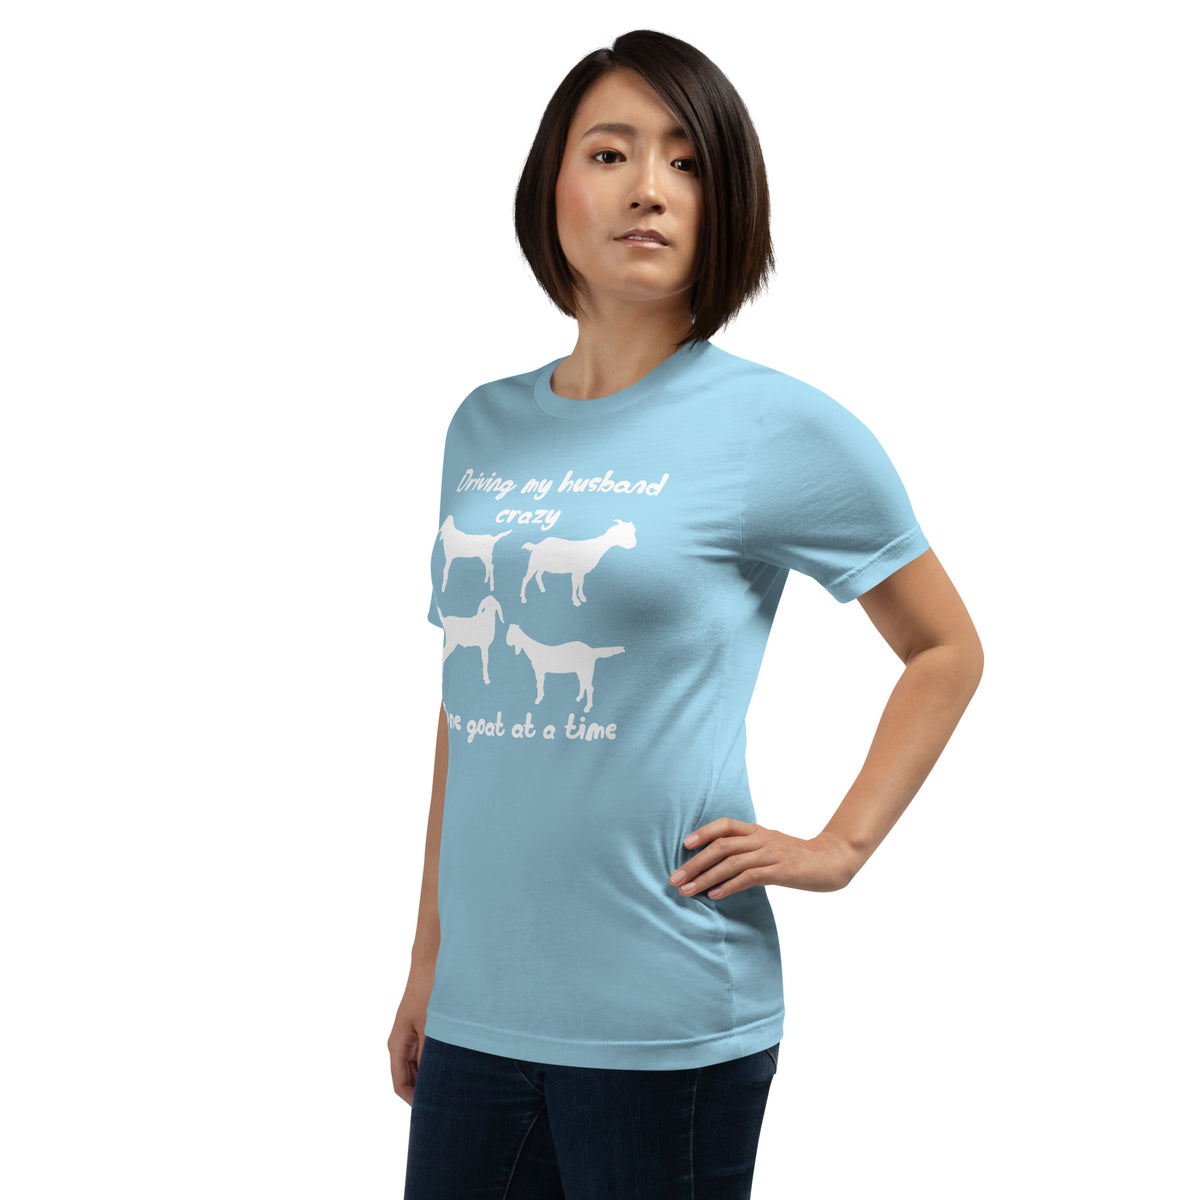 Driving My Husband Crazy One Goat at a Time T-shirt